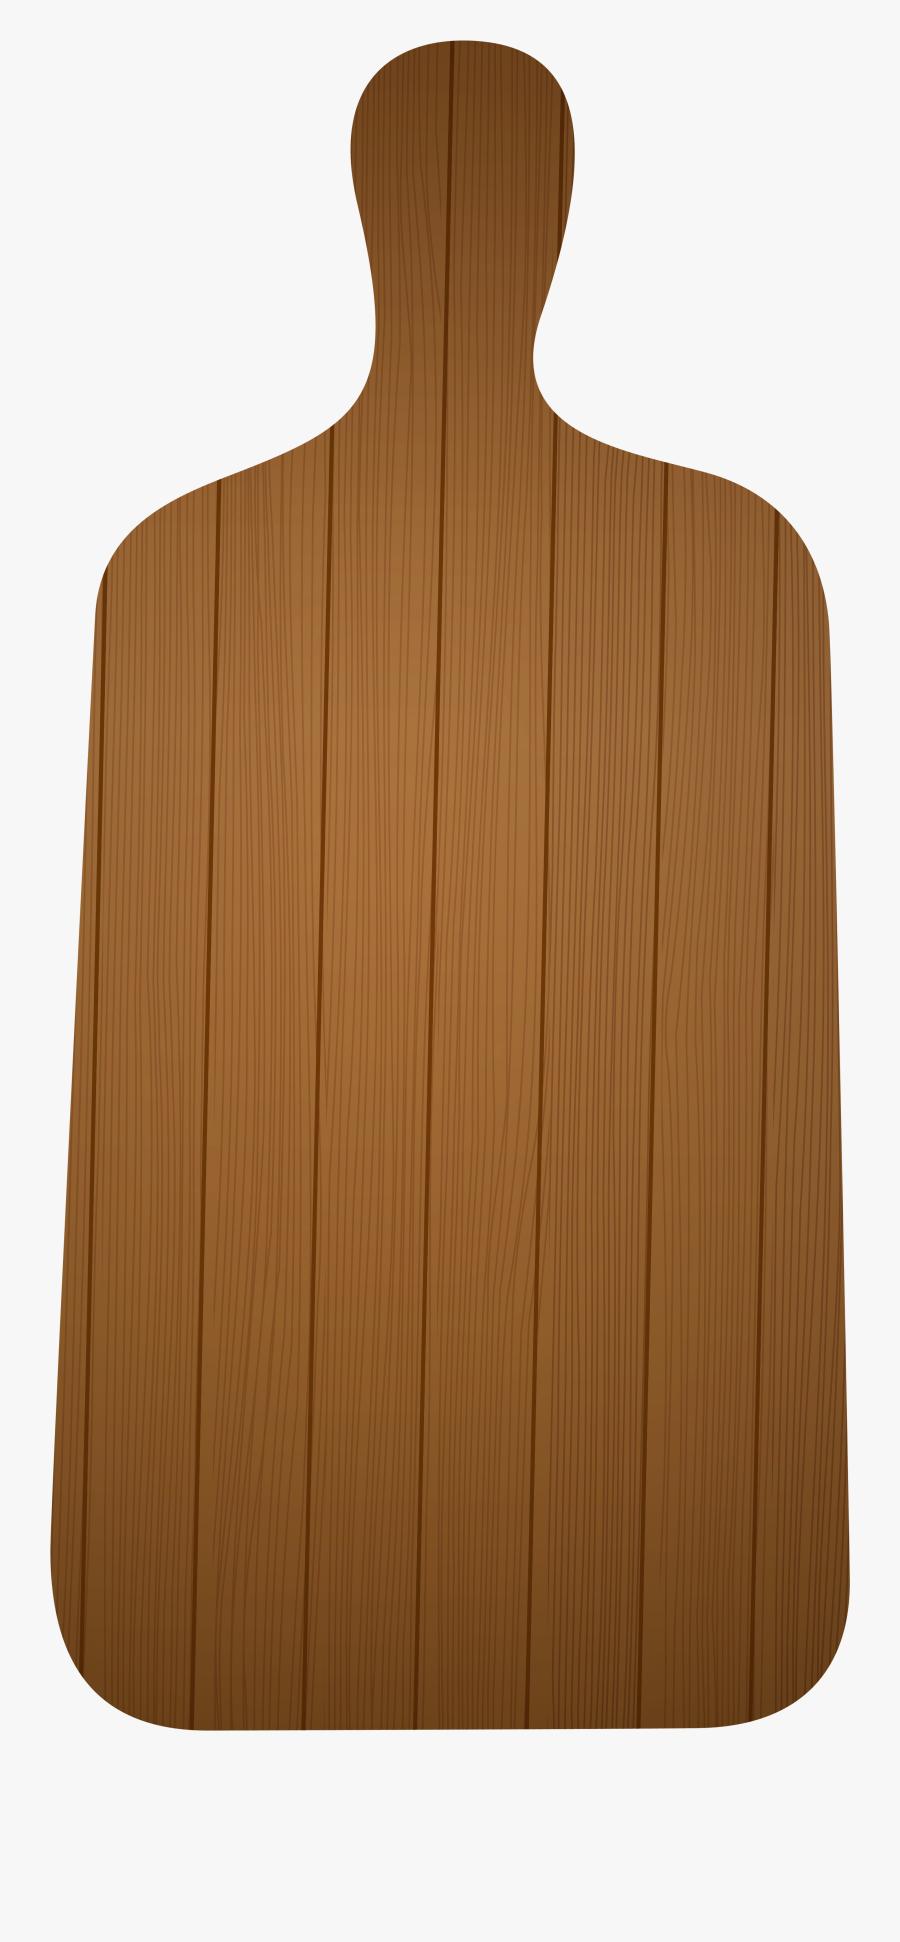 Wooden Cutting Boards Png Clipart - Wooden Cutting Board Clipart, Transparent Clipart